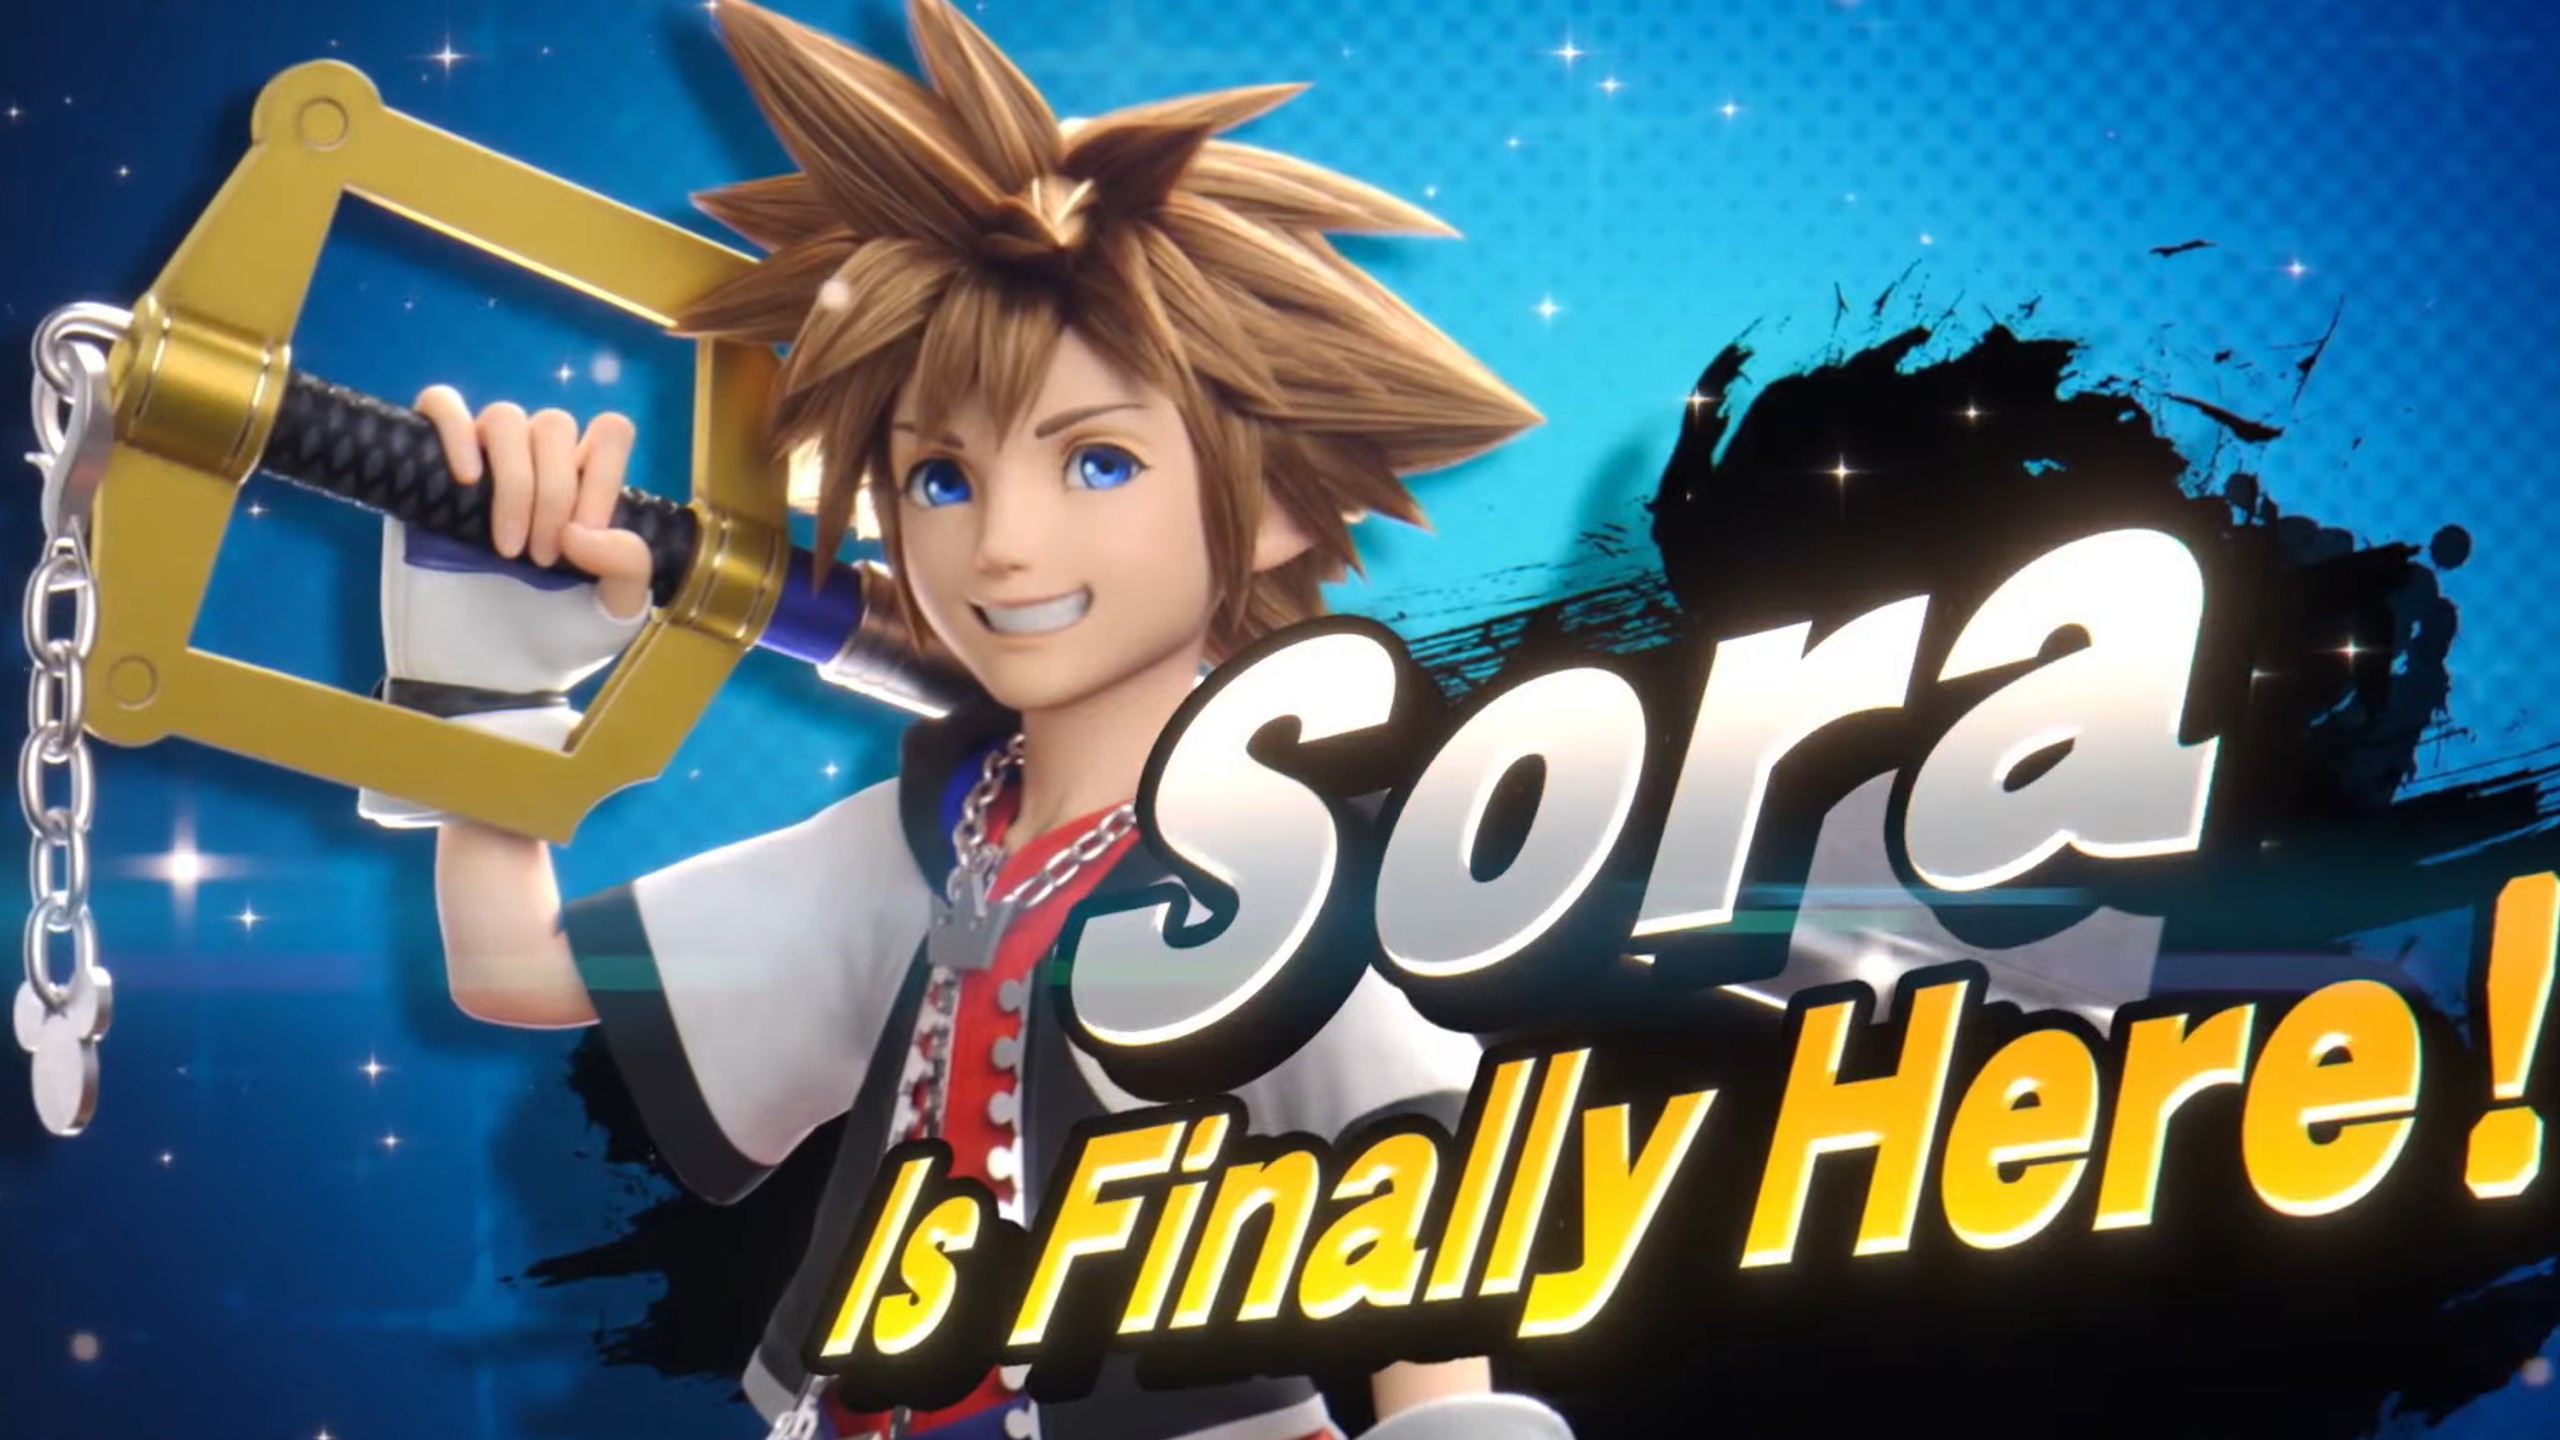 Your Fave is an Avatar of the — Sora from the Kingdom Hearts franchise  is an